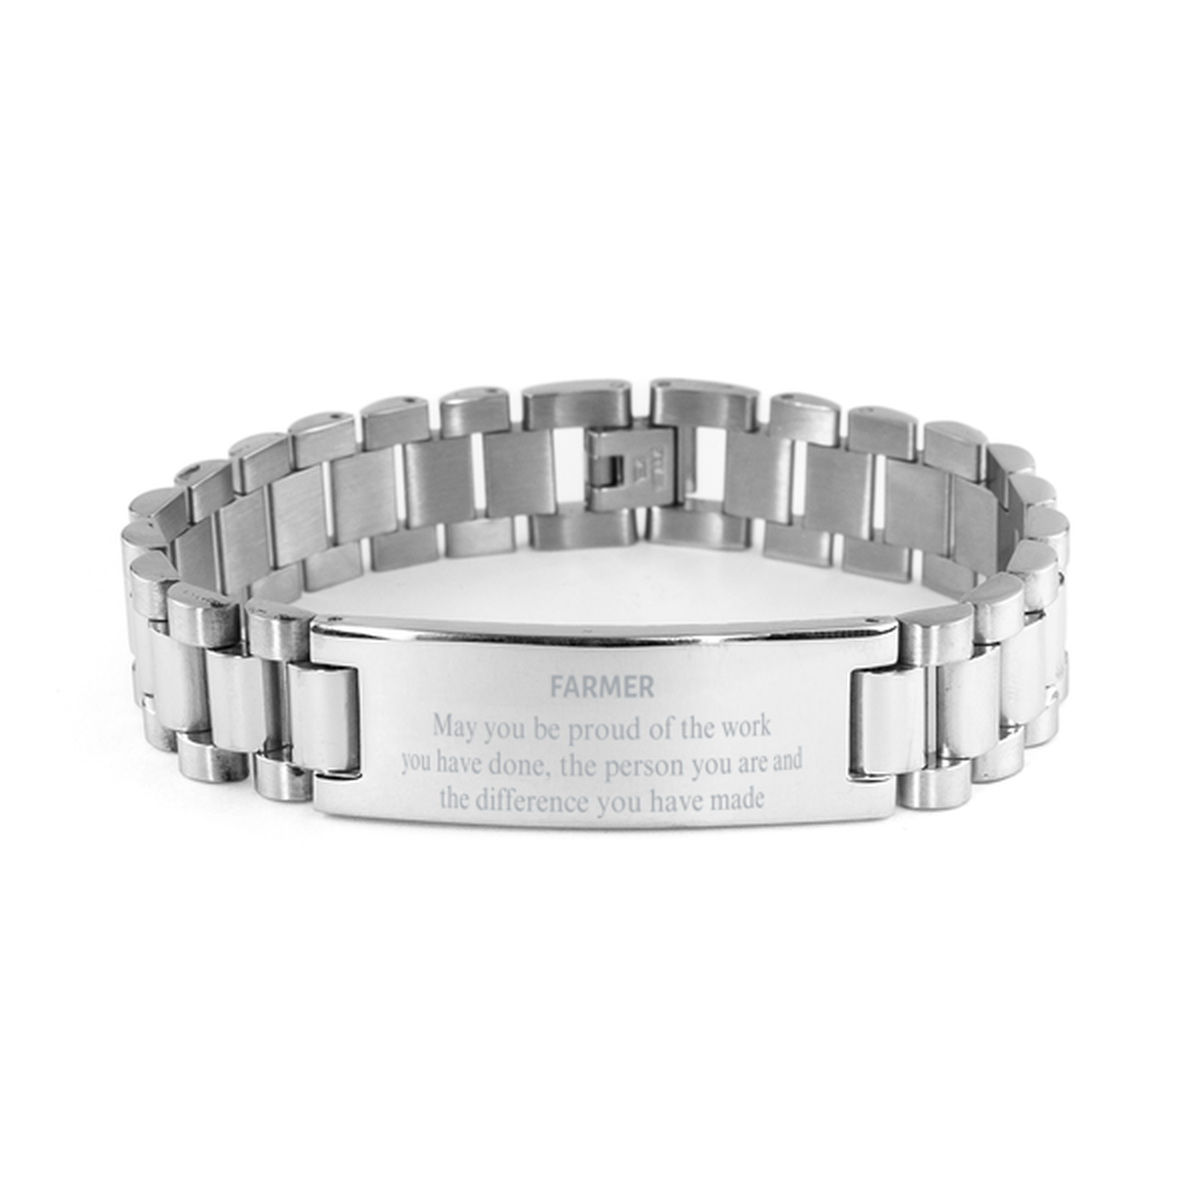 Farmer May you be proud of the work you have done, Retirement Farmer Ladder Stainless Steel Bracelet for Colleague Appreciation Gifts Amazing for Farmer